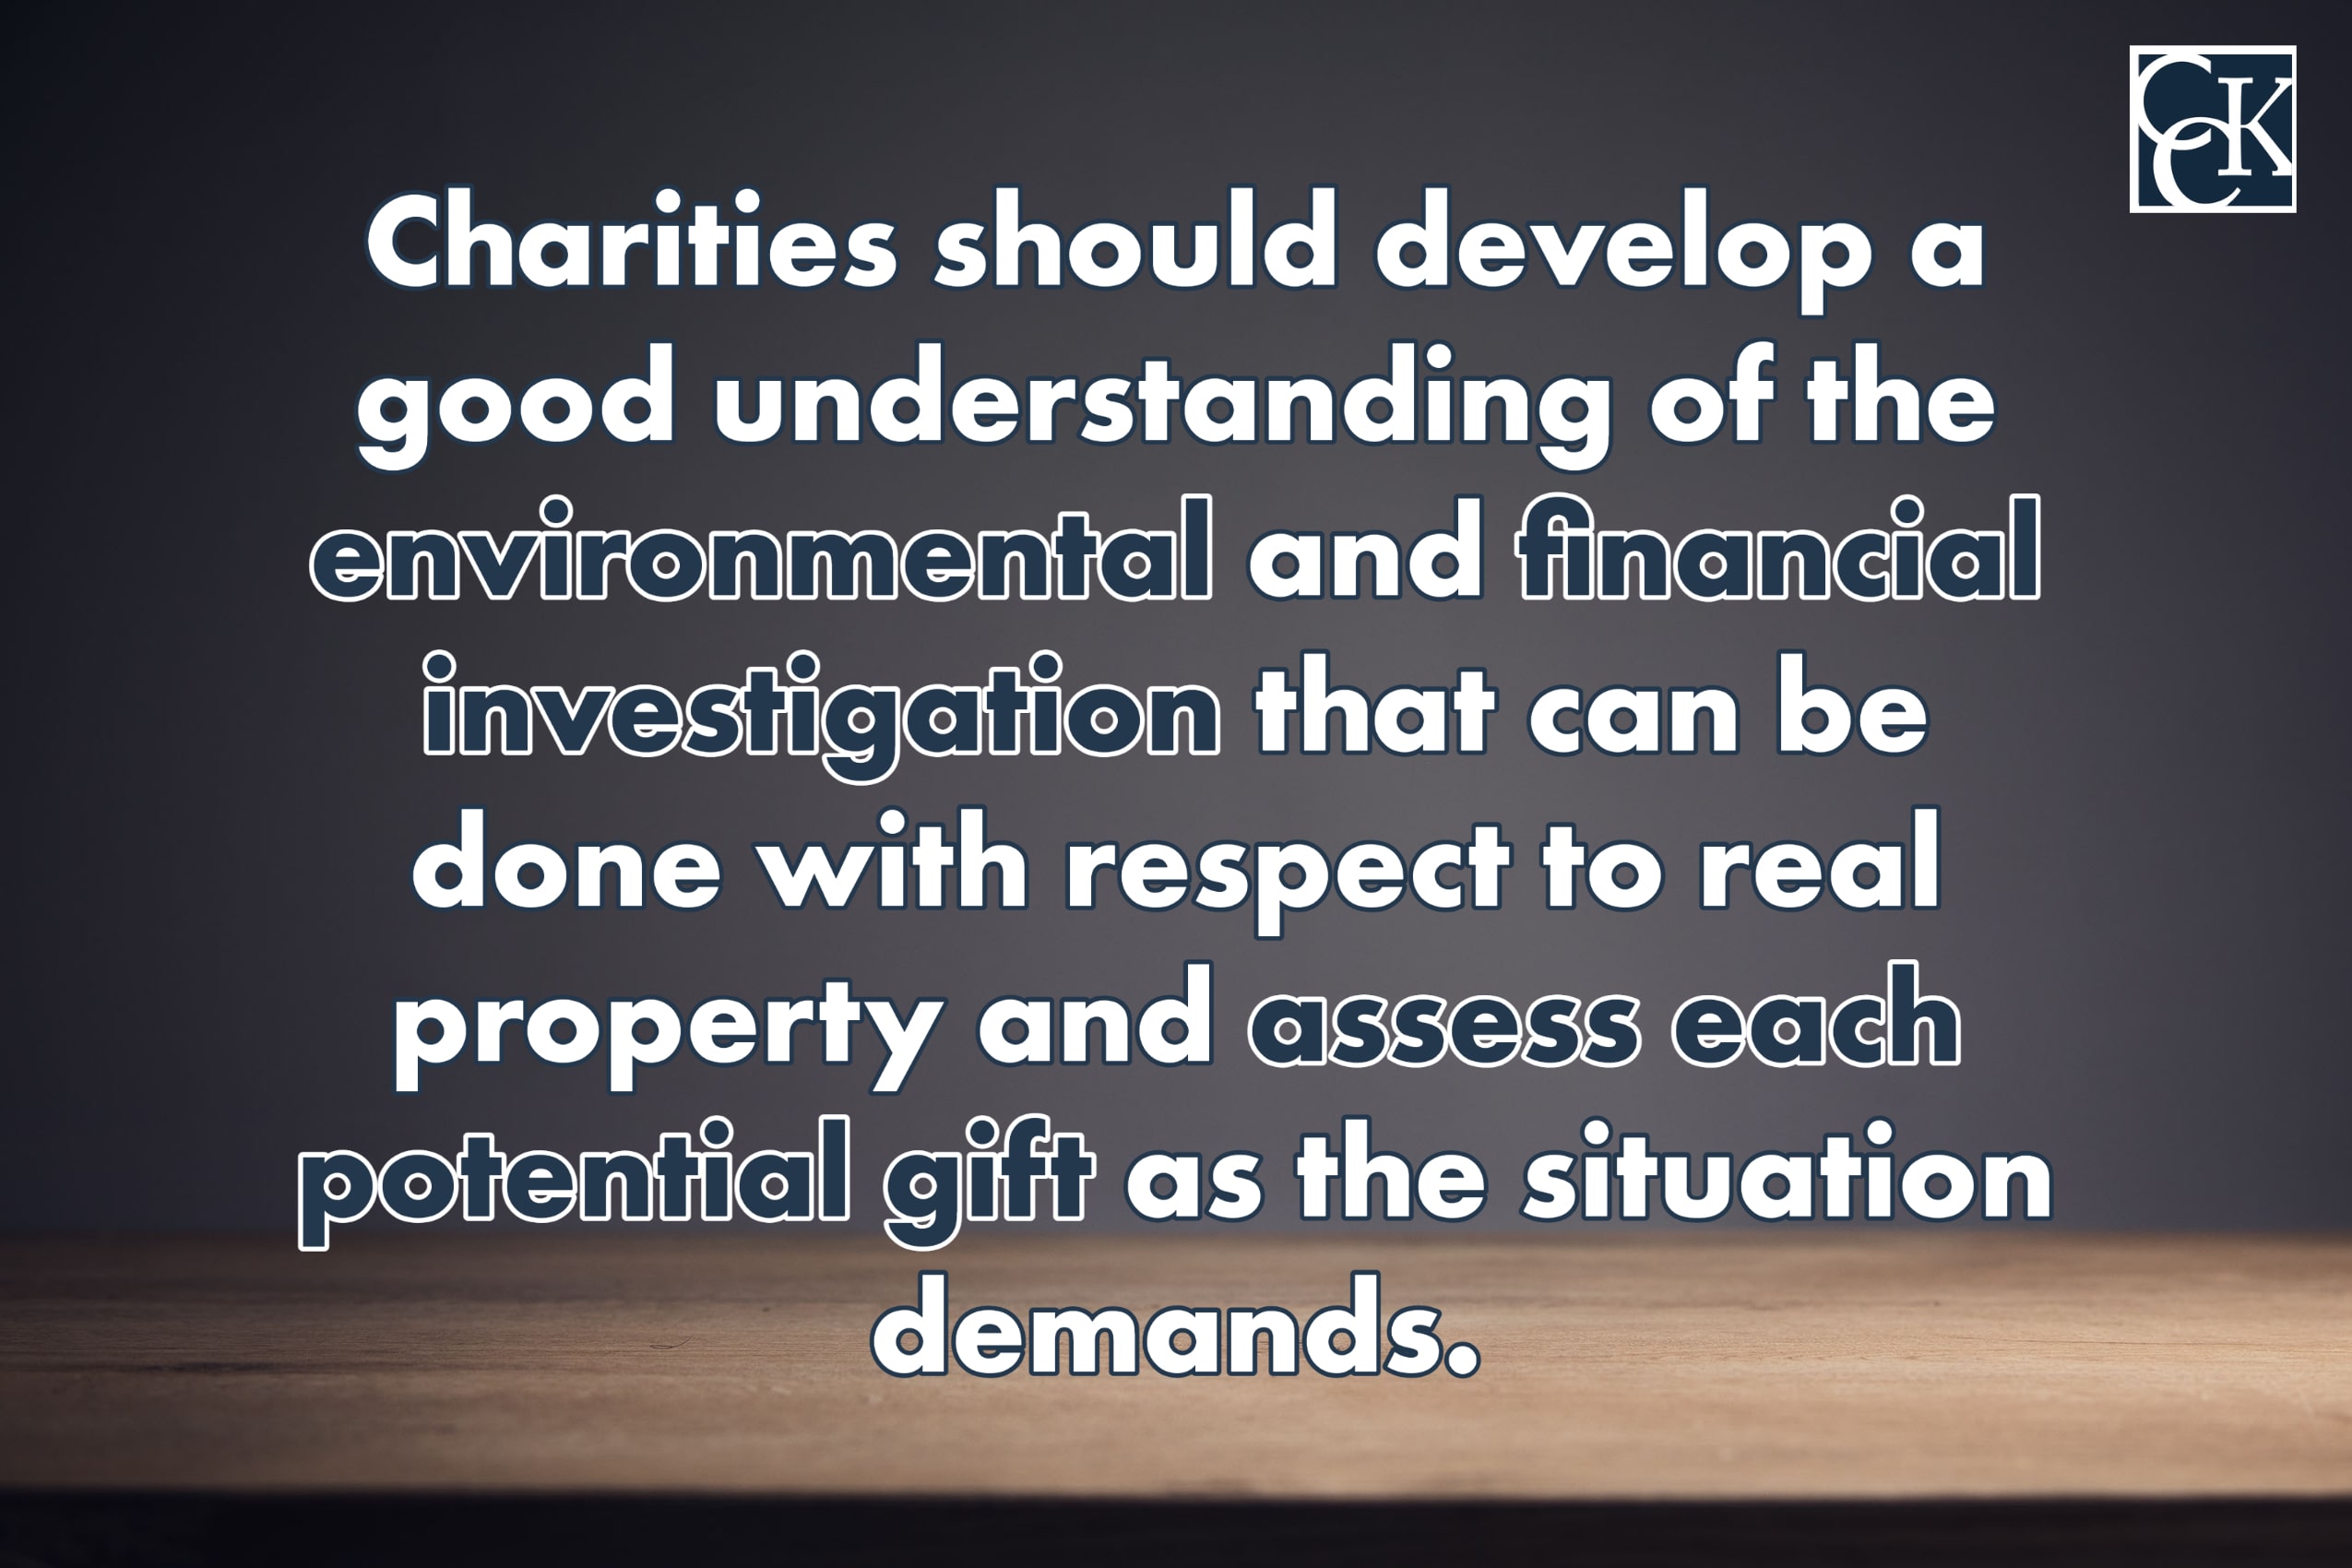 Charities should develop a good understanding of the environmental and financial investigation that can be done with respect to real property and assess each potential gift as the situation demands. 